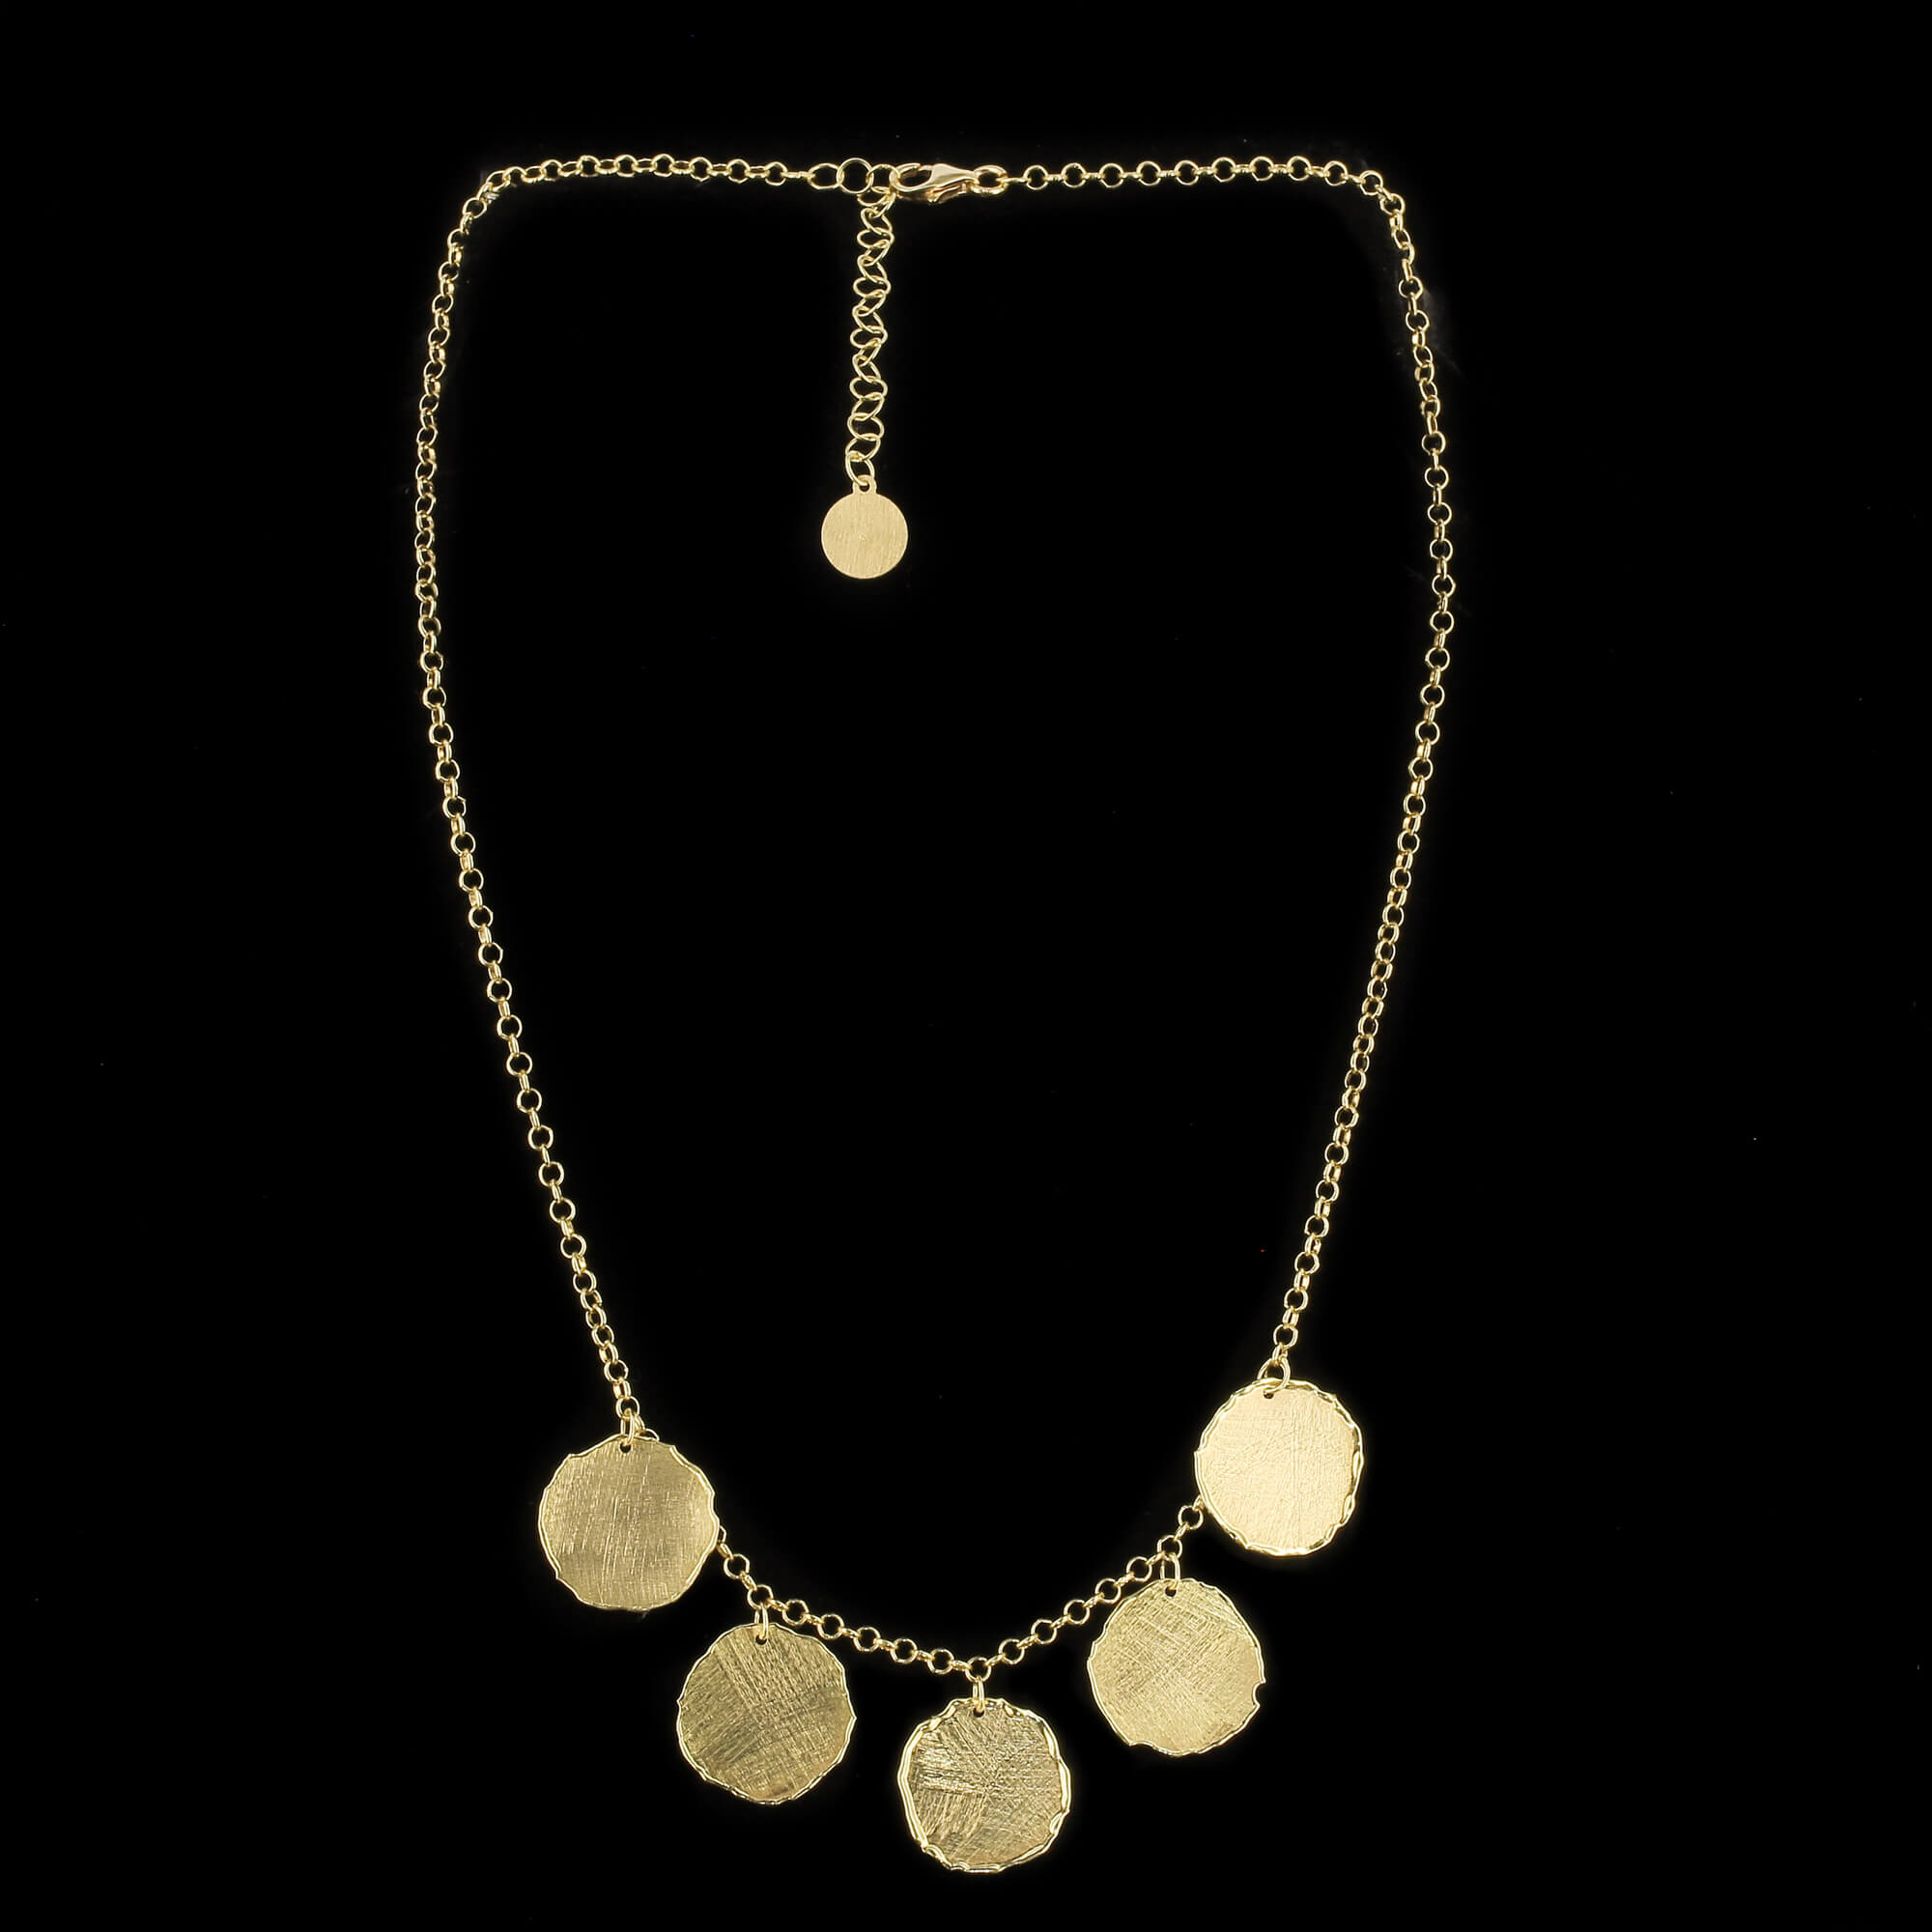 Golden link chain with round pendants, 18kt